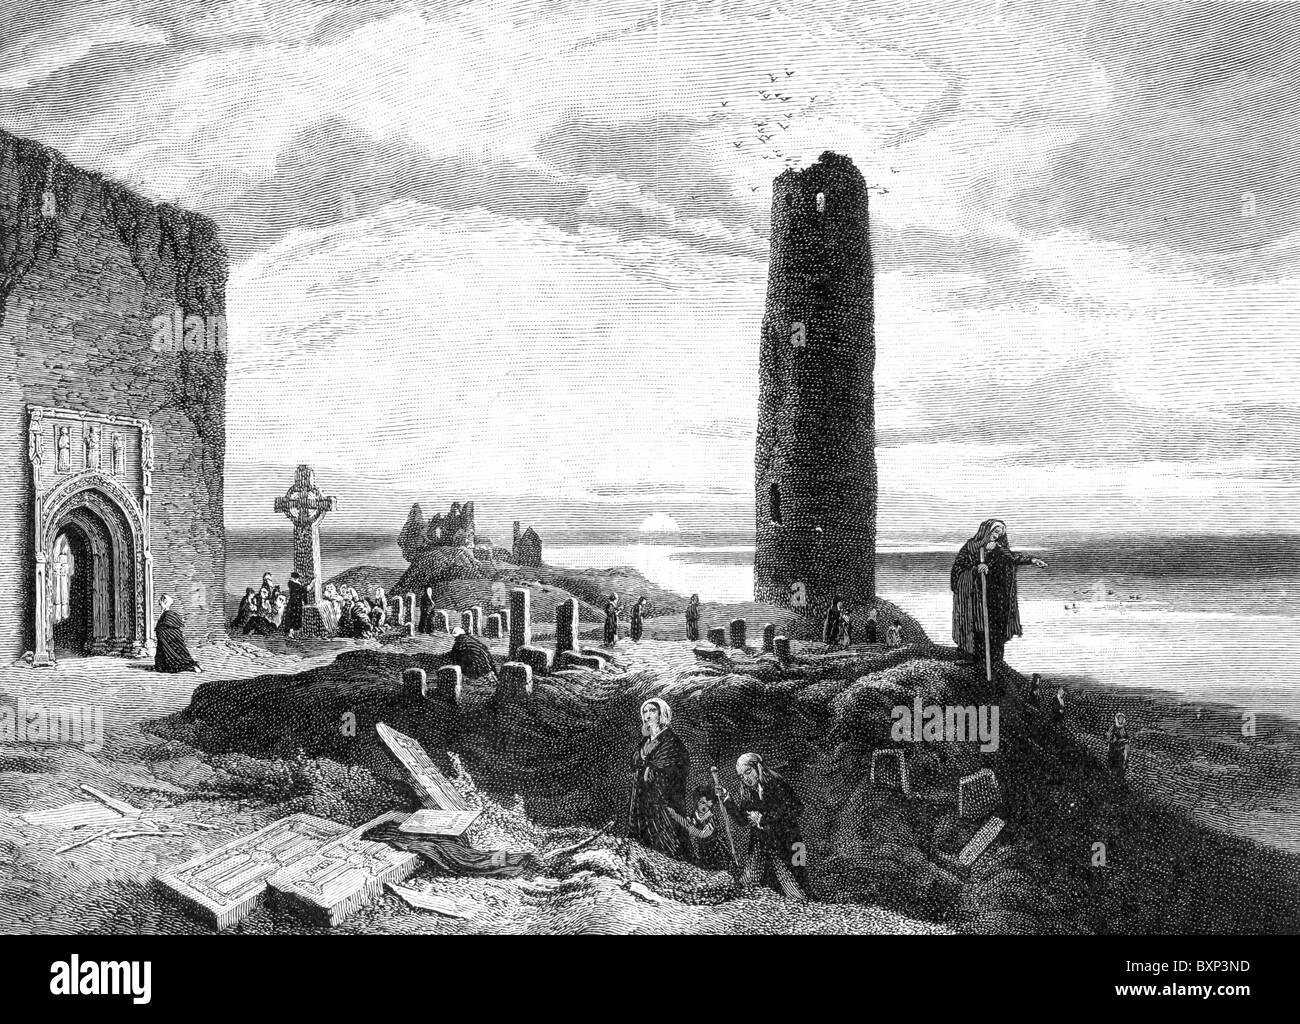 Clonmacnoise monastery, County Offaly, Ireland after an engraving by William Henry Bartlett; Black and White Illustration; Stock Photo